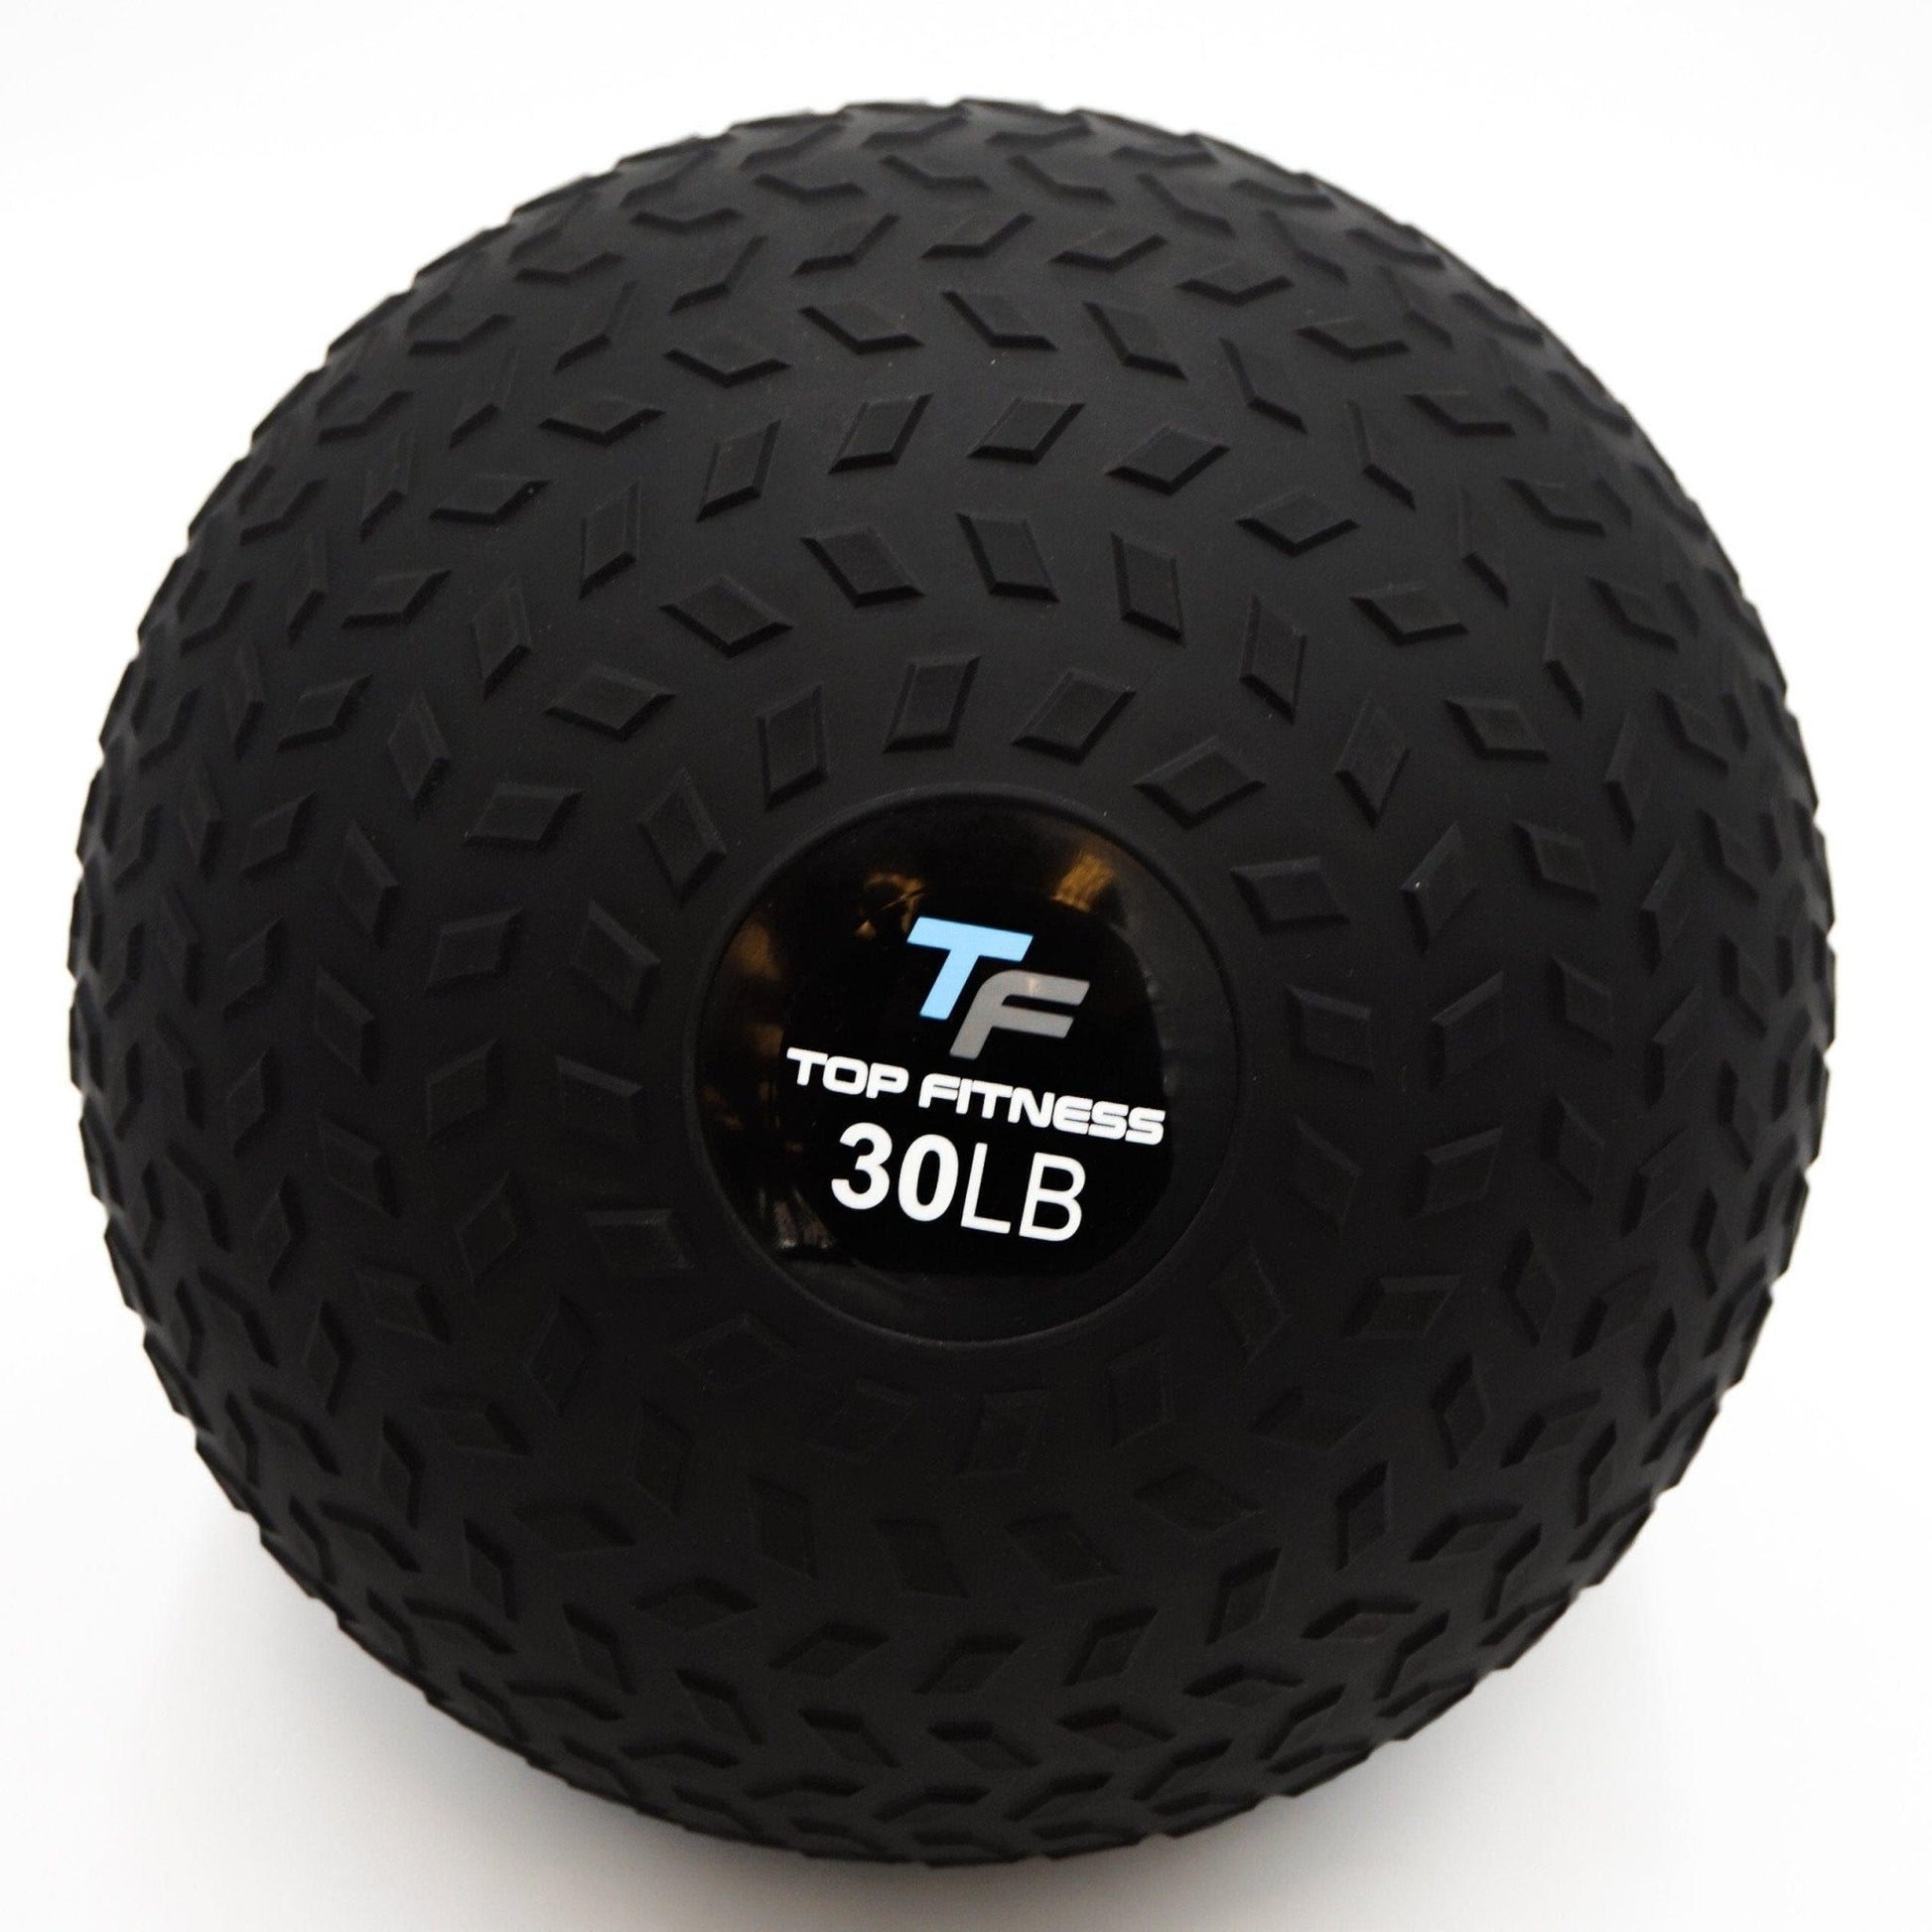 Top Fitness Slam Ball Weighted Resistance Top Fitness 30lb